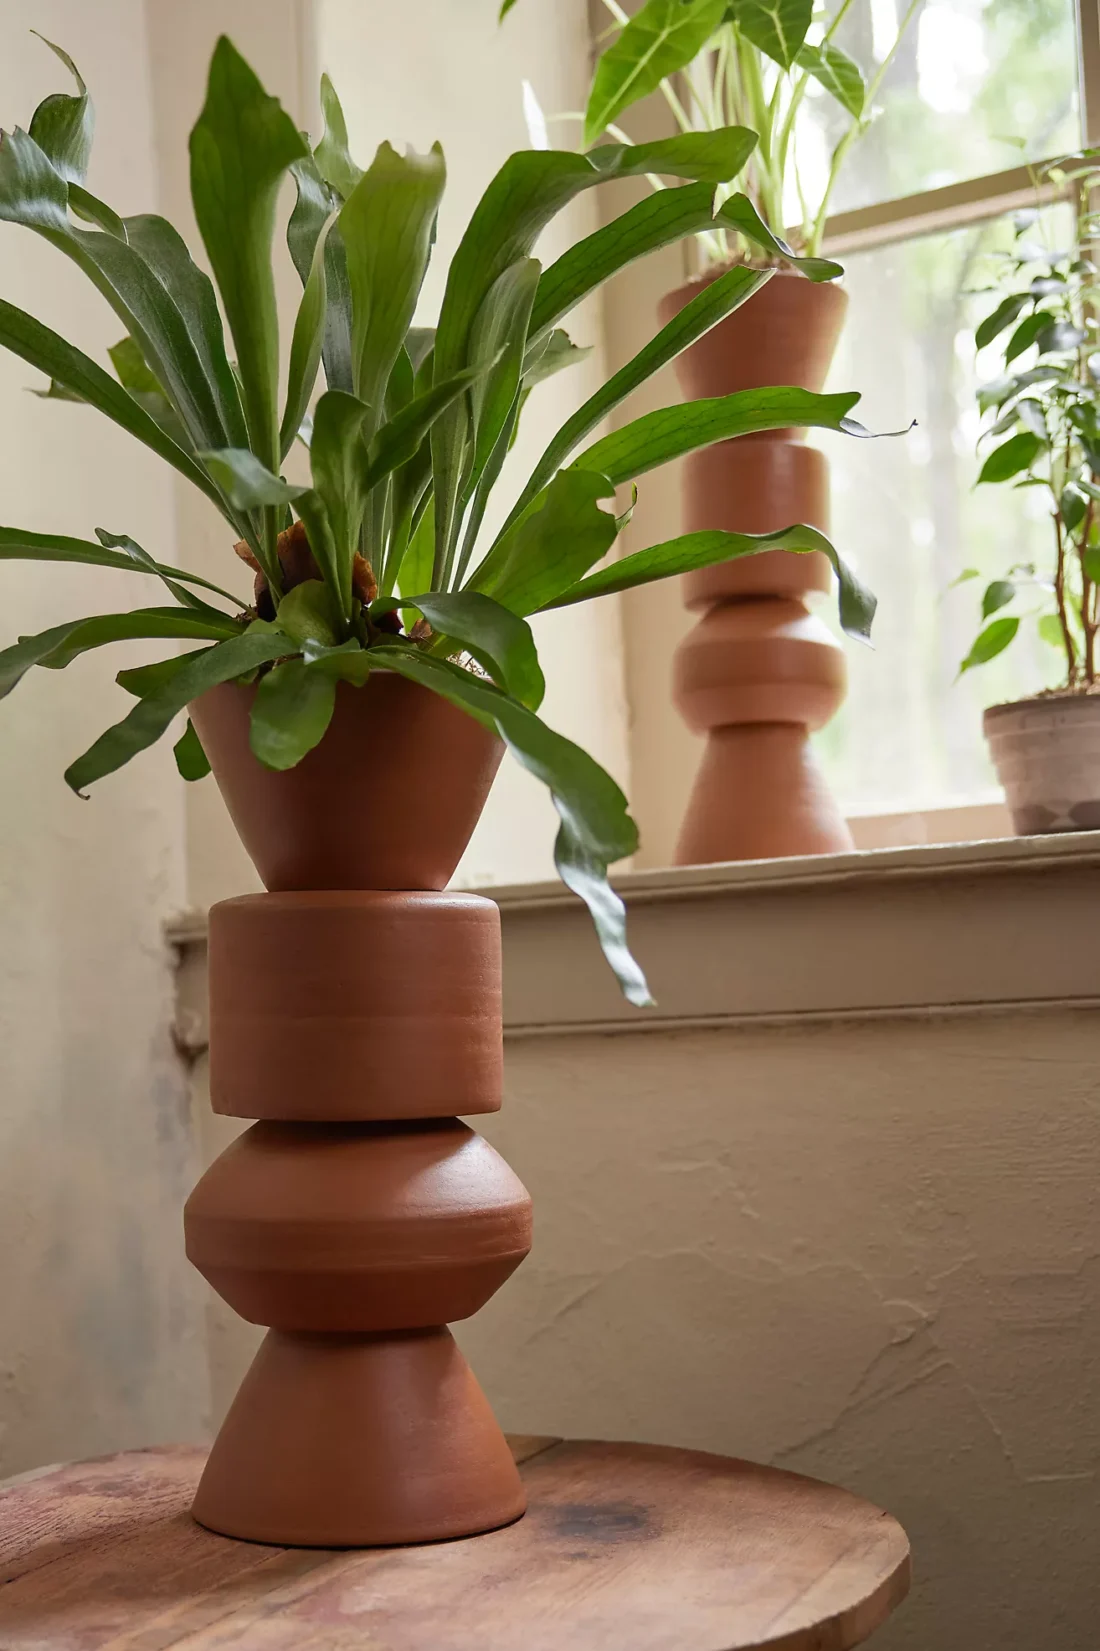 A potted plant with broad green leaves stacked on a series of inverted terracotta pots, placed near a window with more plants in the background.